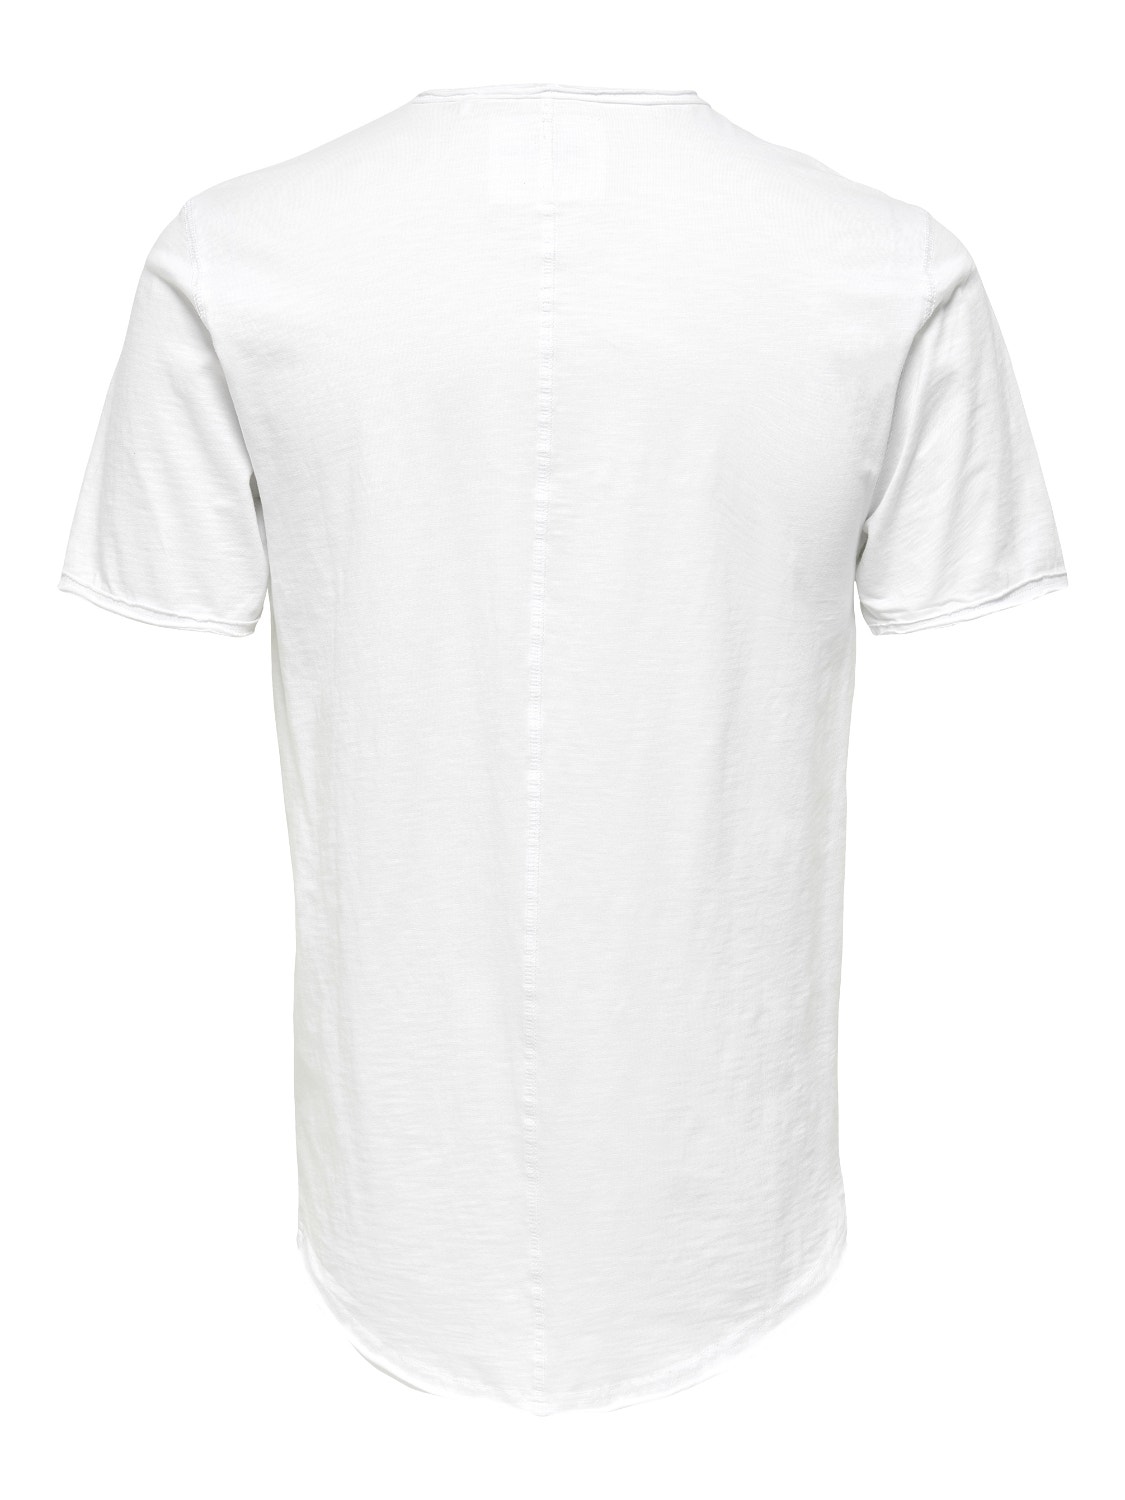 ONLY & SONS Long Line Fit O-ringning T-shirt -Bright White - 22017822